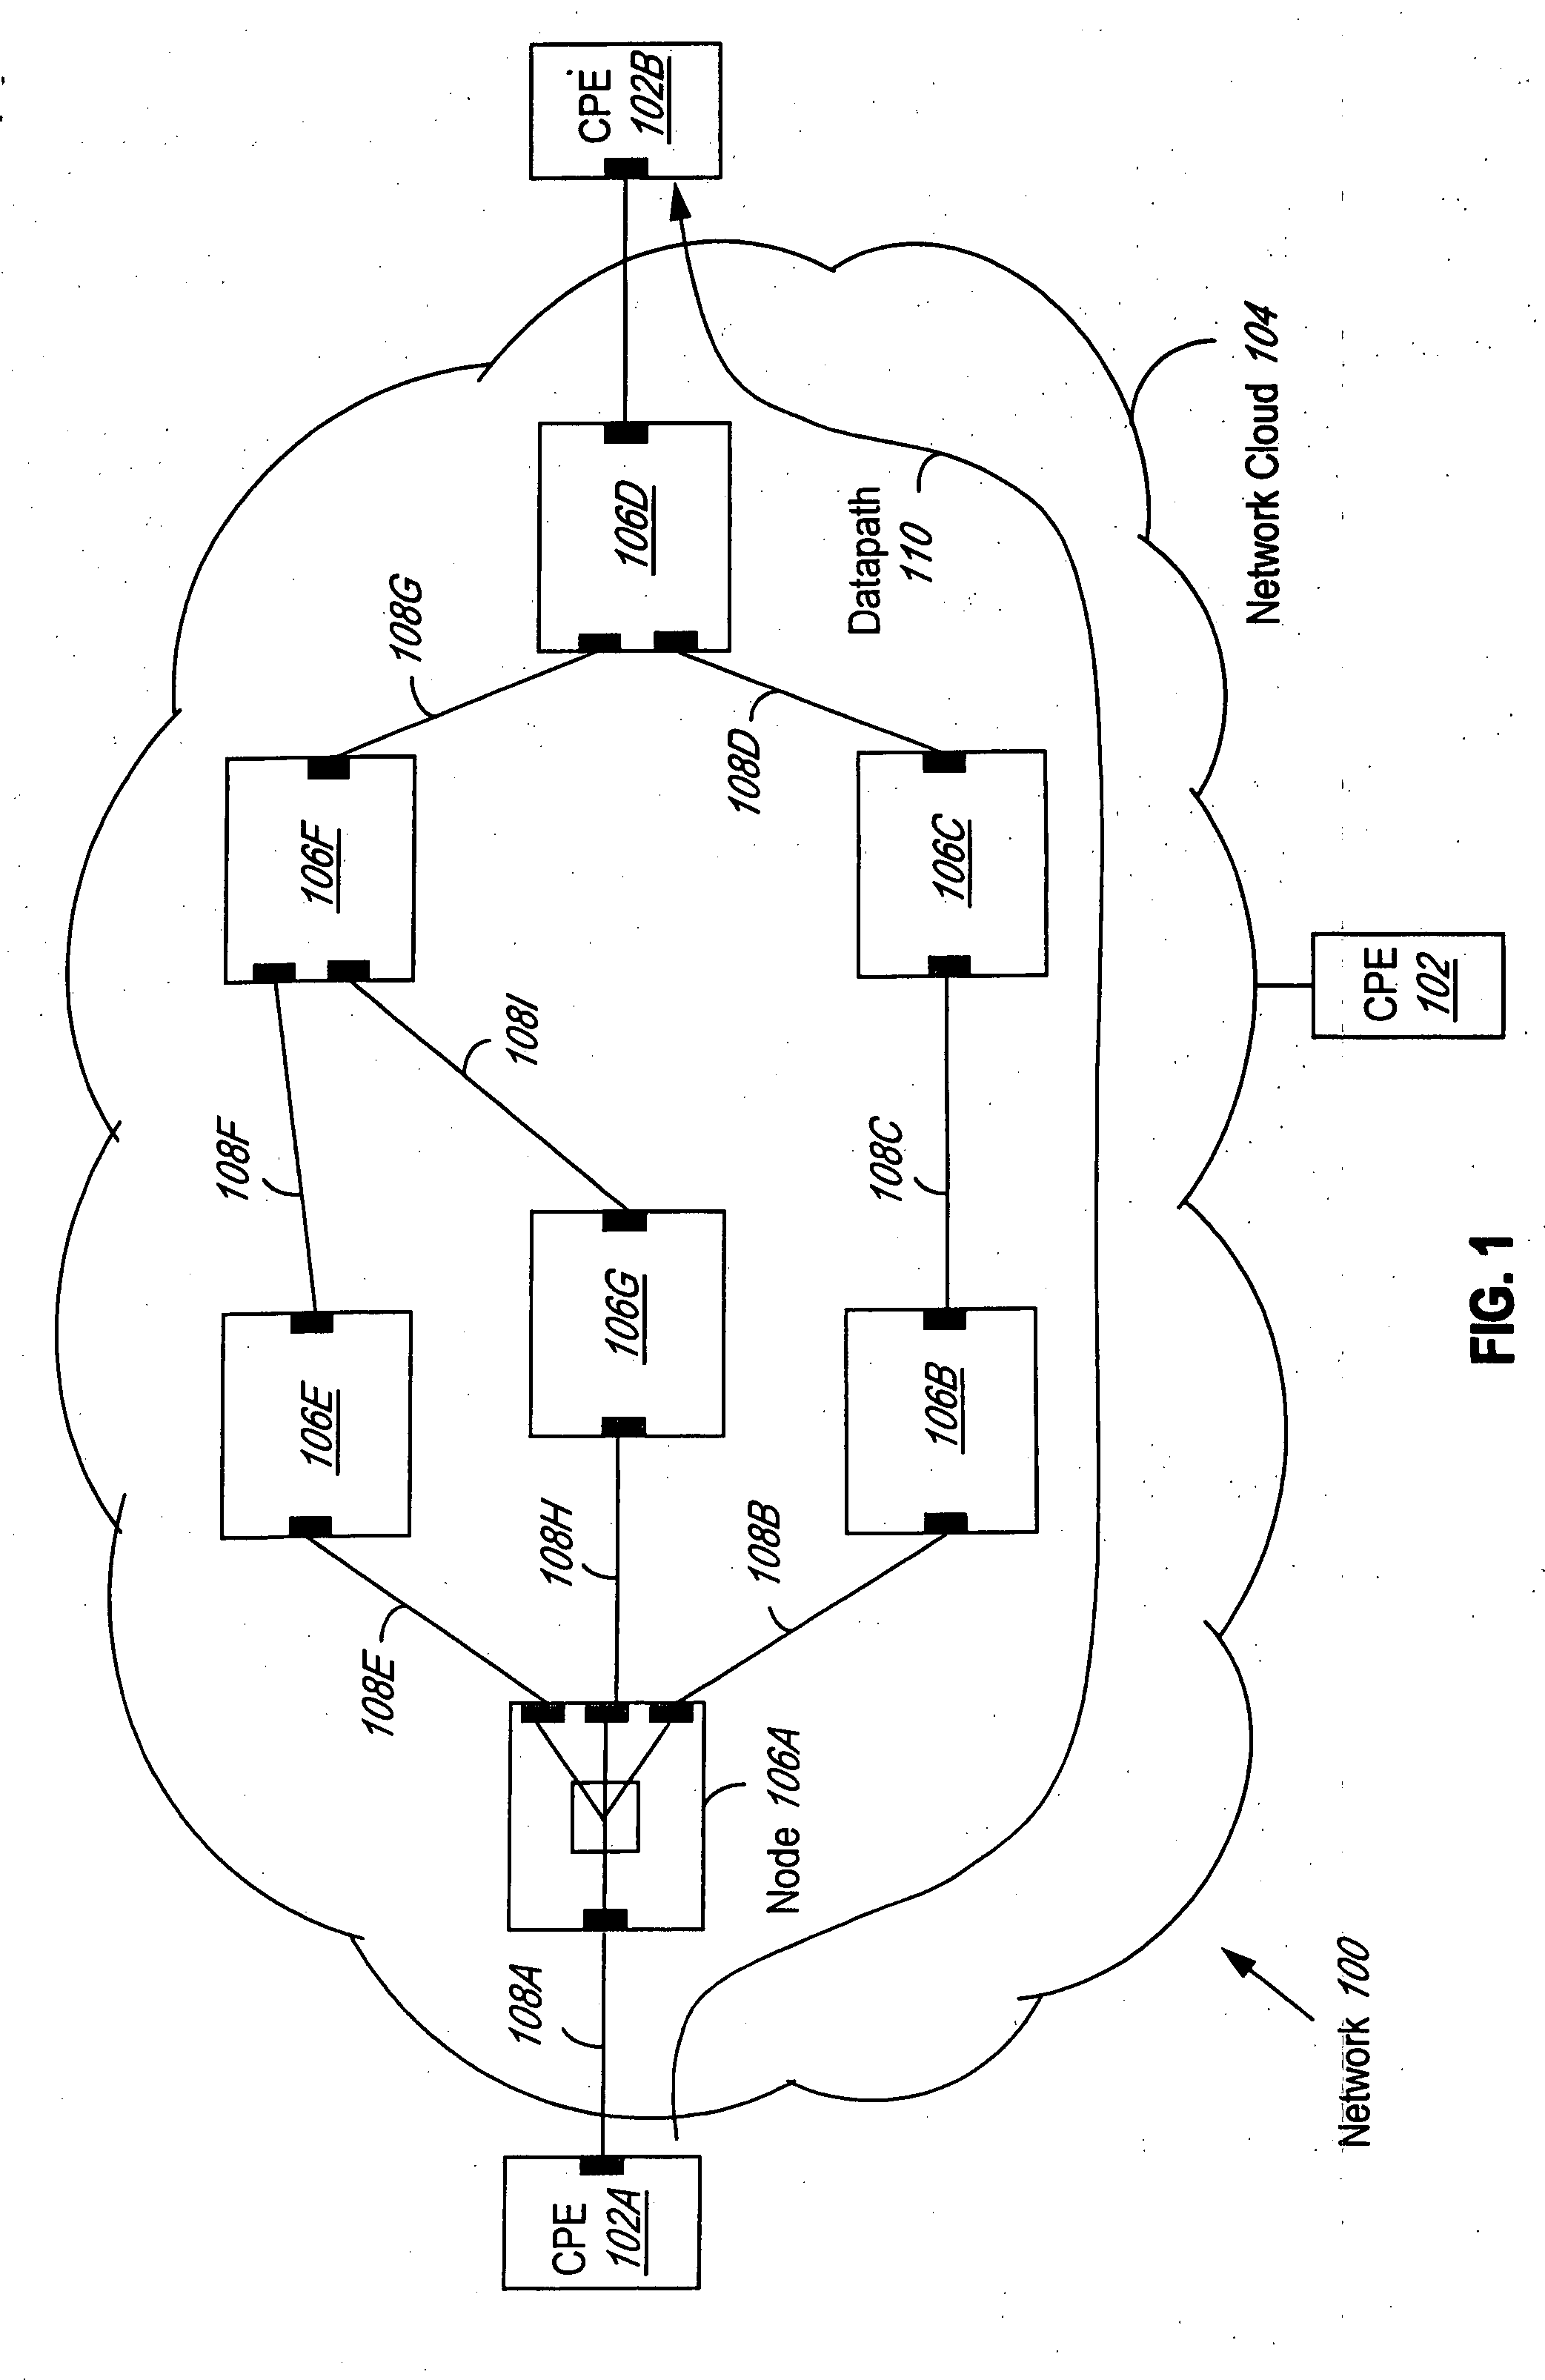 System and method for parallel connection selection in a communication network